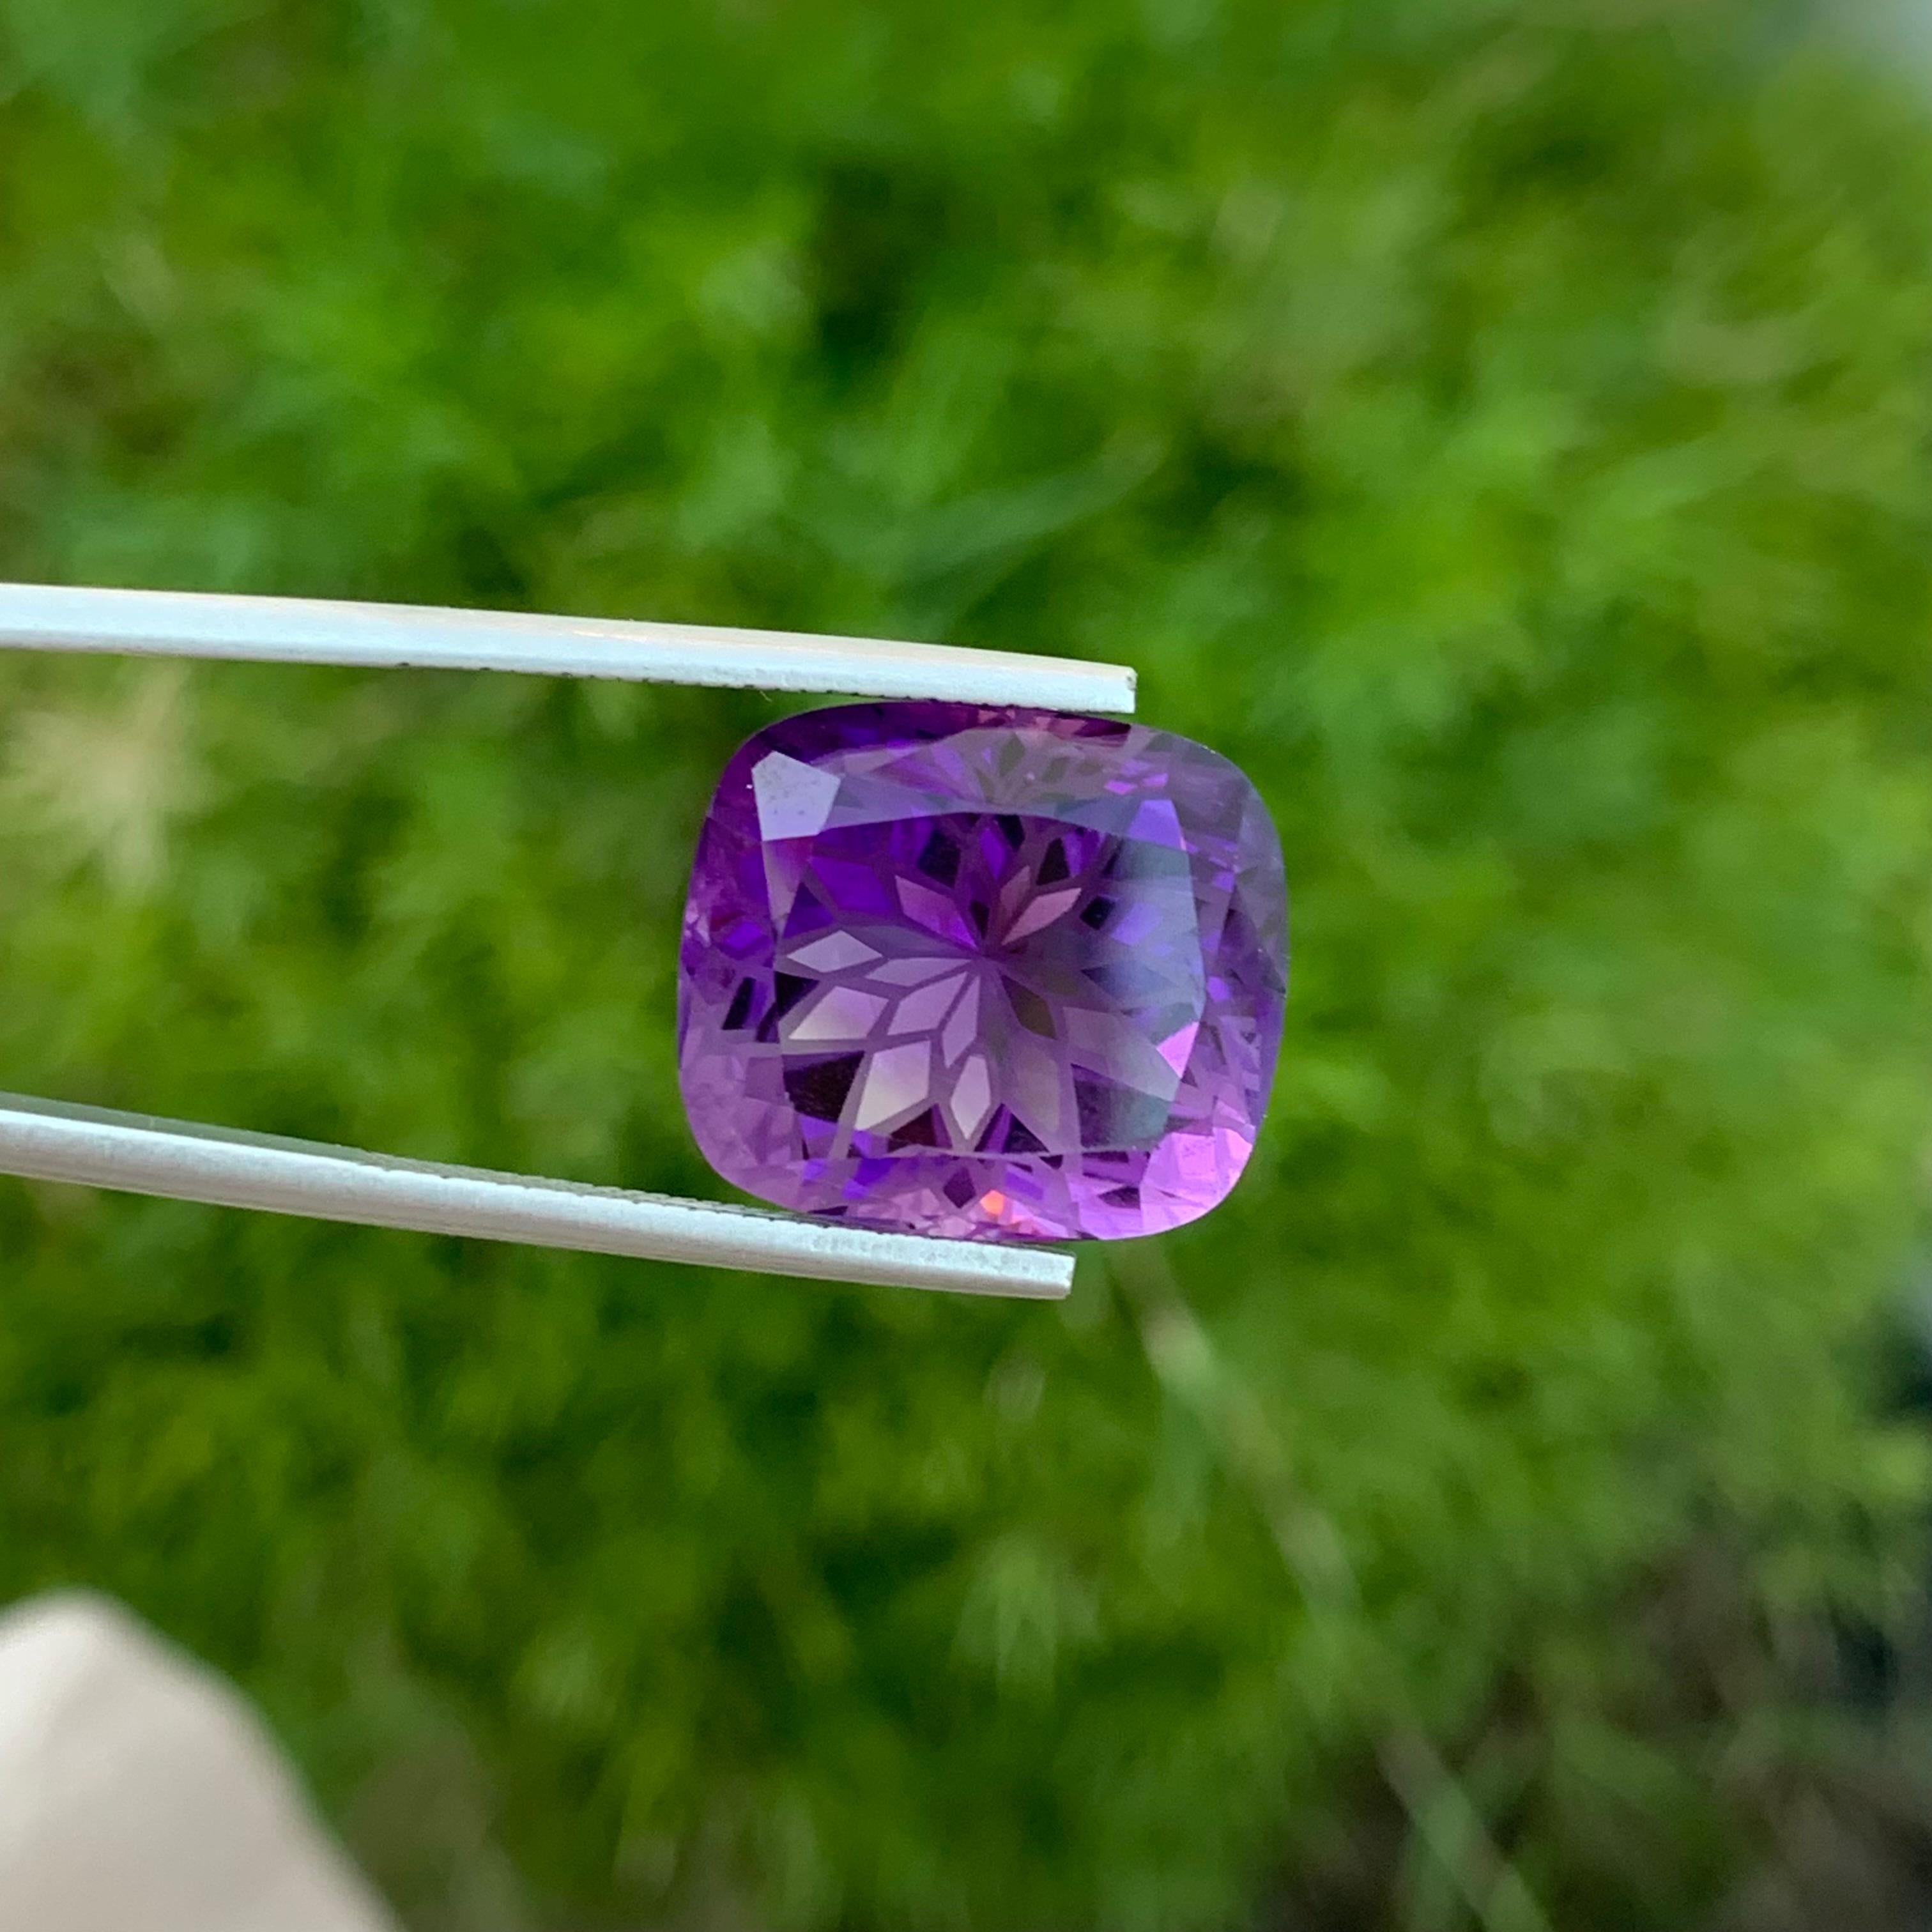 Loose Amethyst
Weight: 18.60 Carats
Dimension: 17.2 x 15 x 11.8 Mm
Colour: Purple
Origin: Brazil
Treatment: Non
Certificate: On Demand
Shape: Cushion

Amethyst, a stunning variety of quartz known for its mesmerizing purple hue, has captivated humans